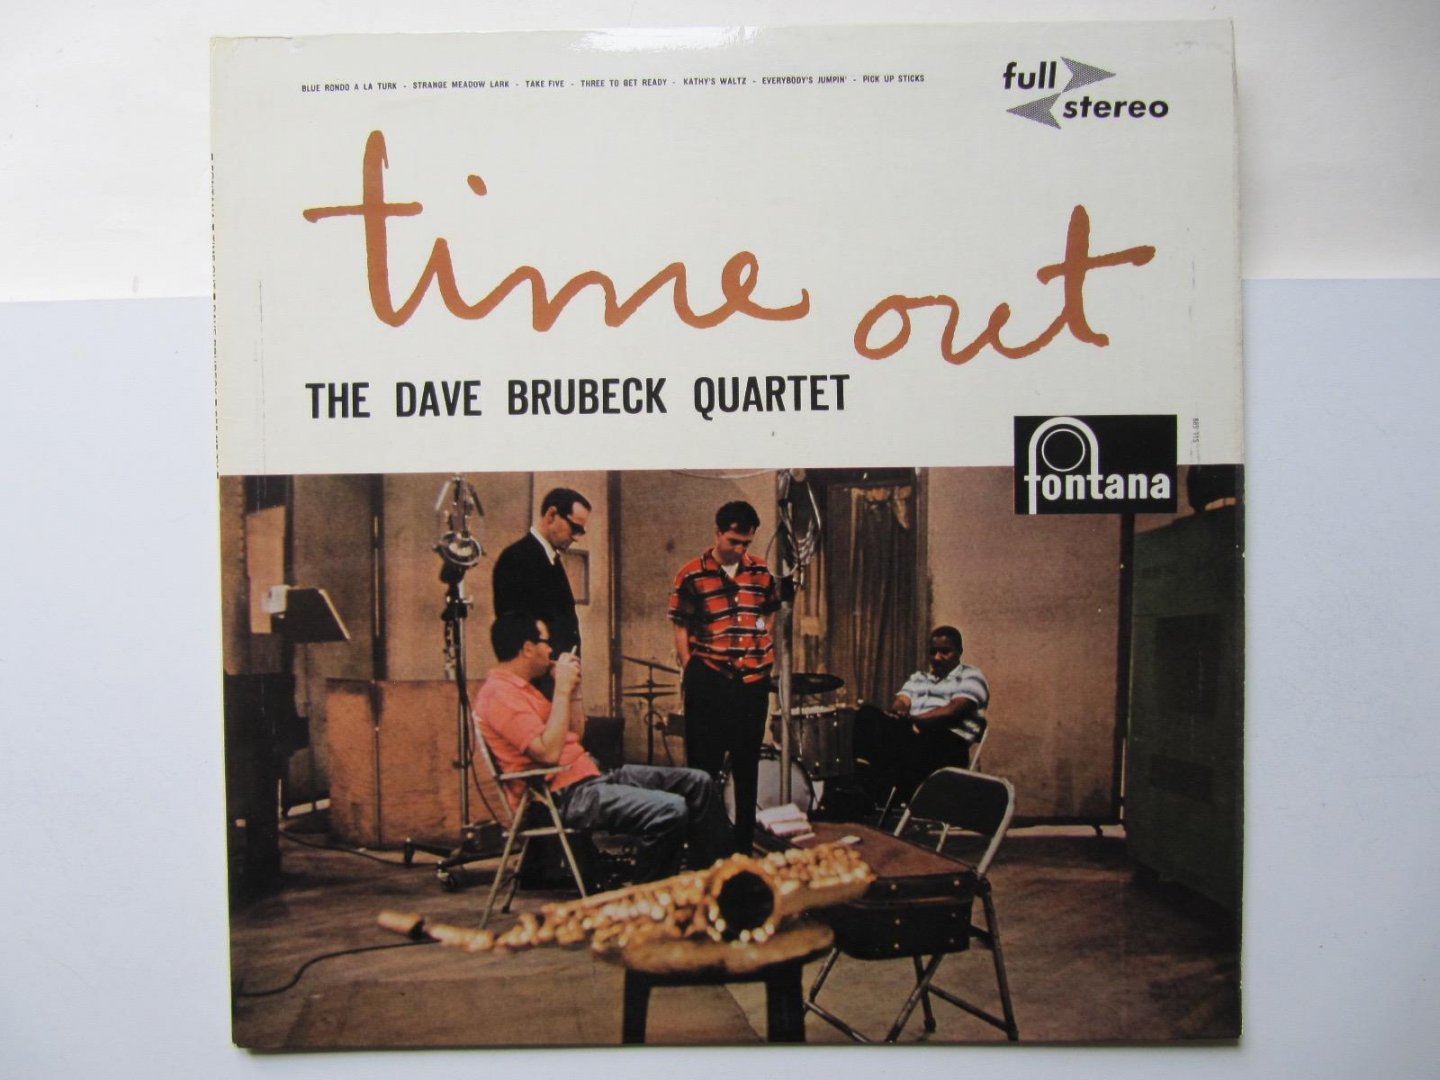 Dave Brubeck - Jazz - Time further out enz.